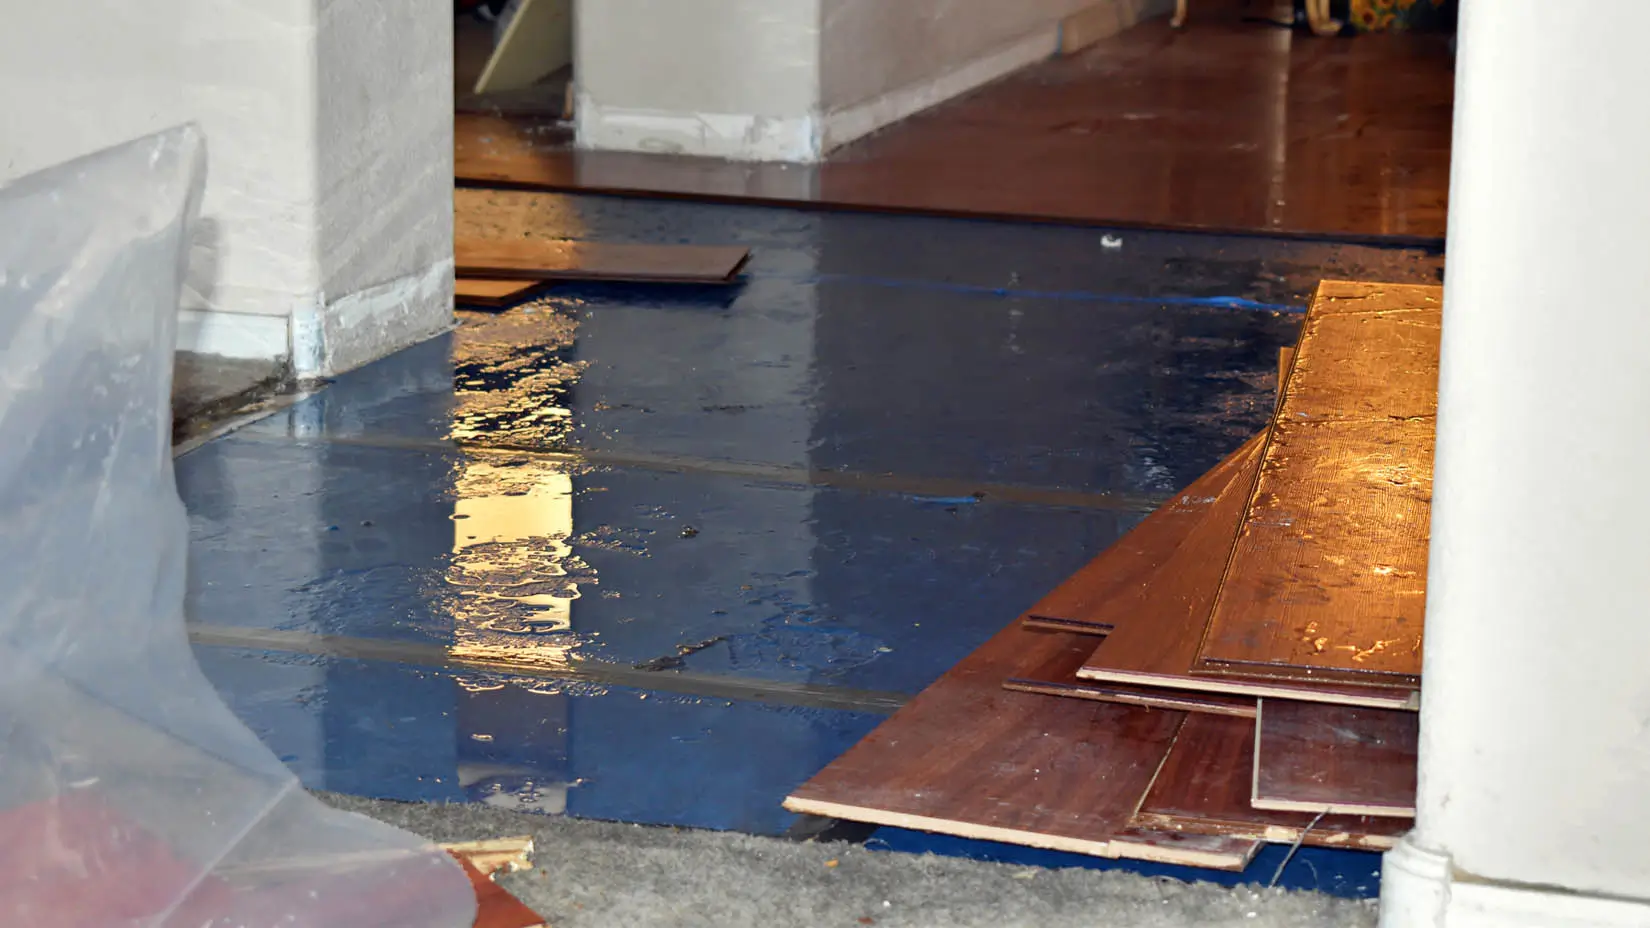 Image showing water damage inside a house.